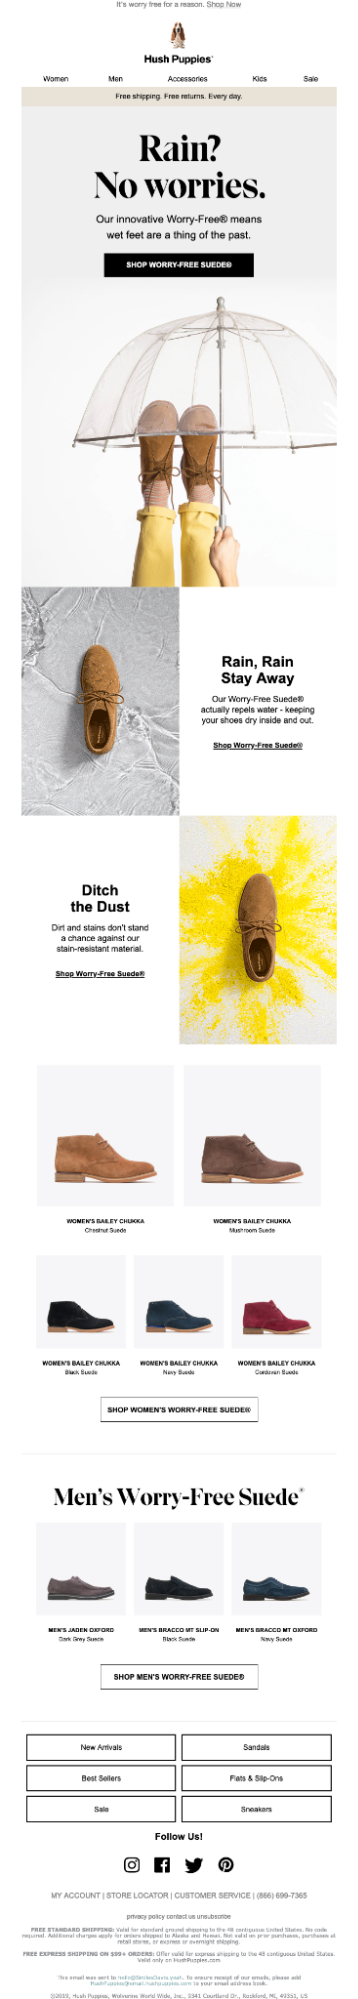 Hush Puppies monsoon email templates